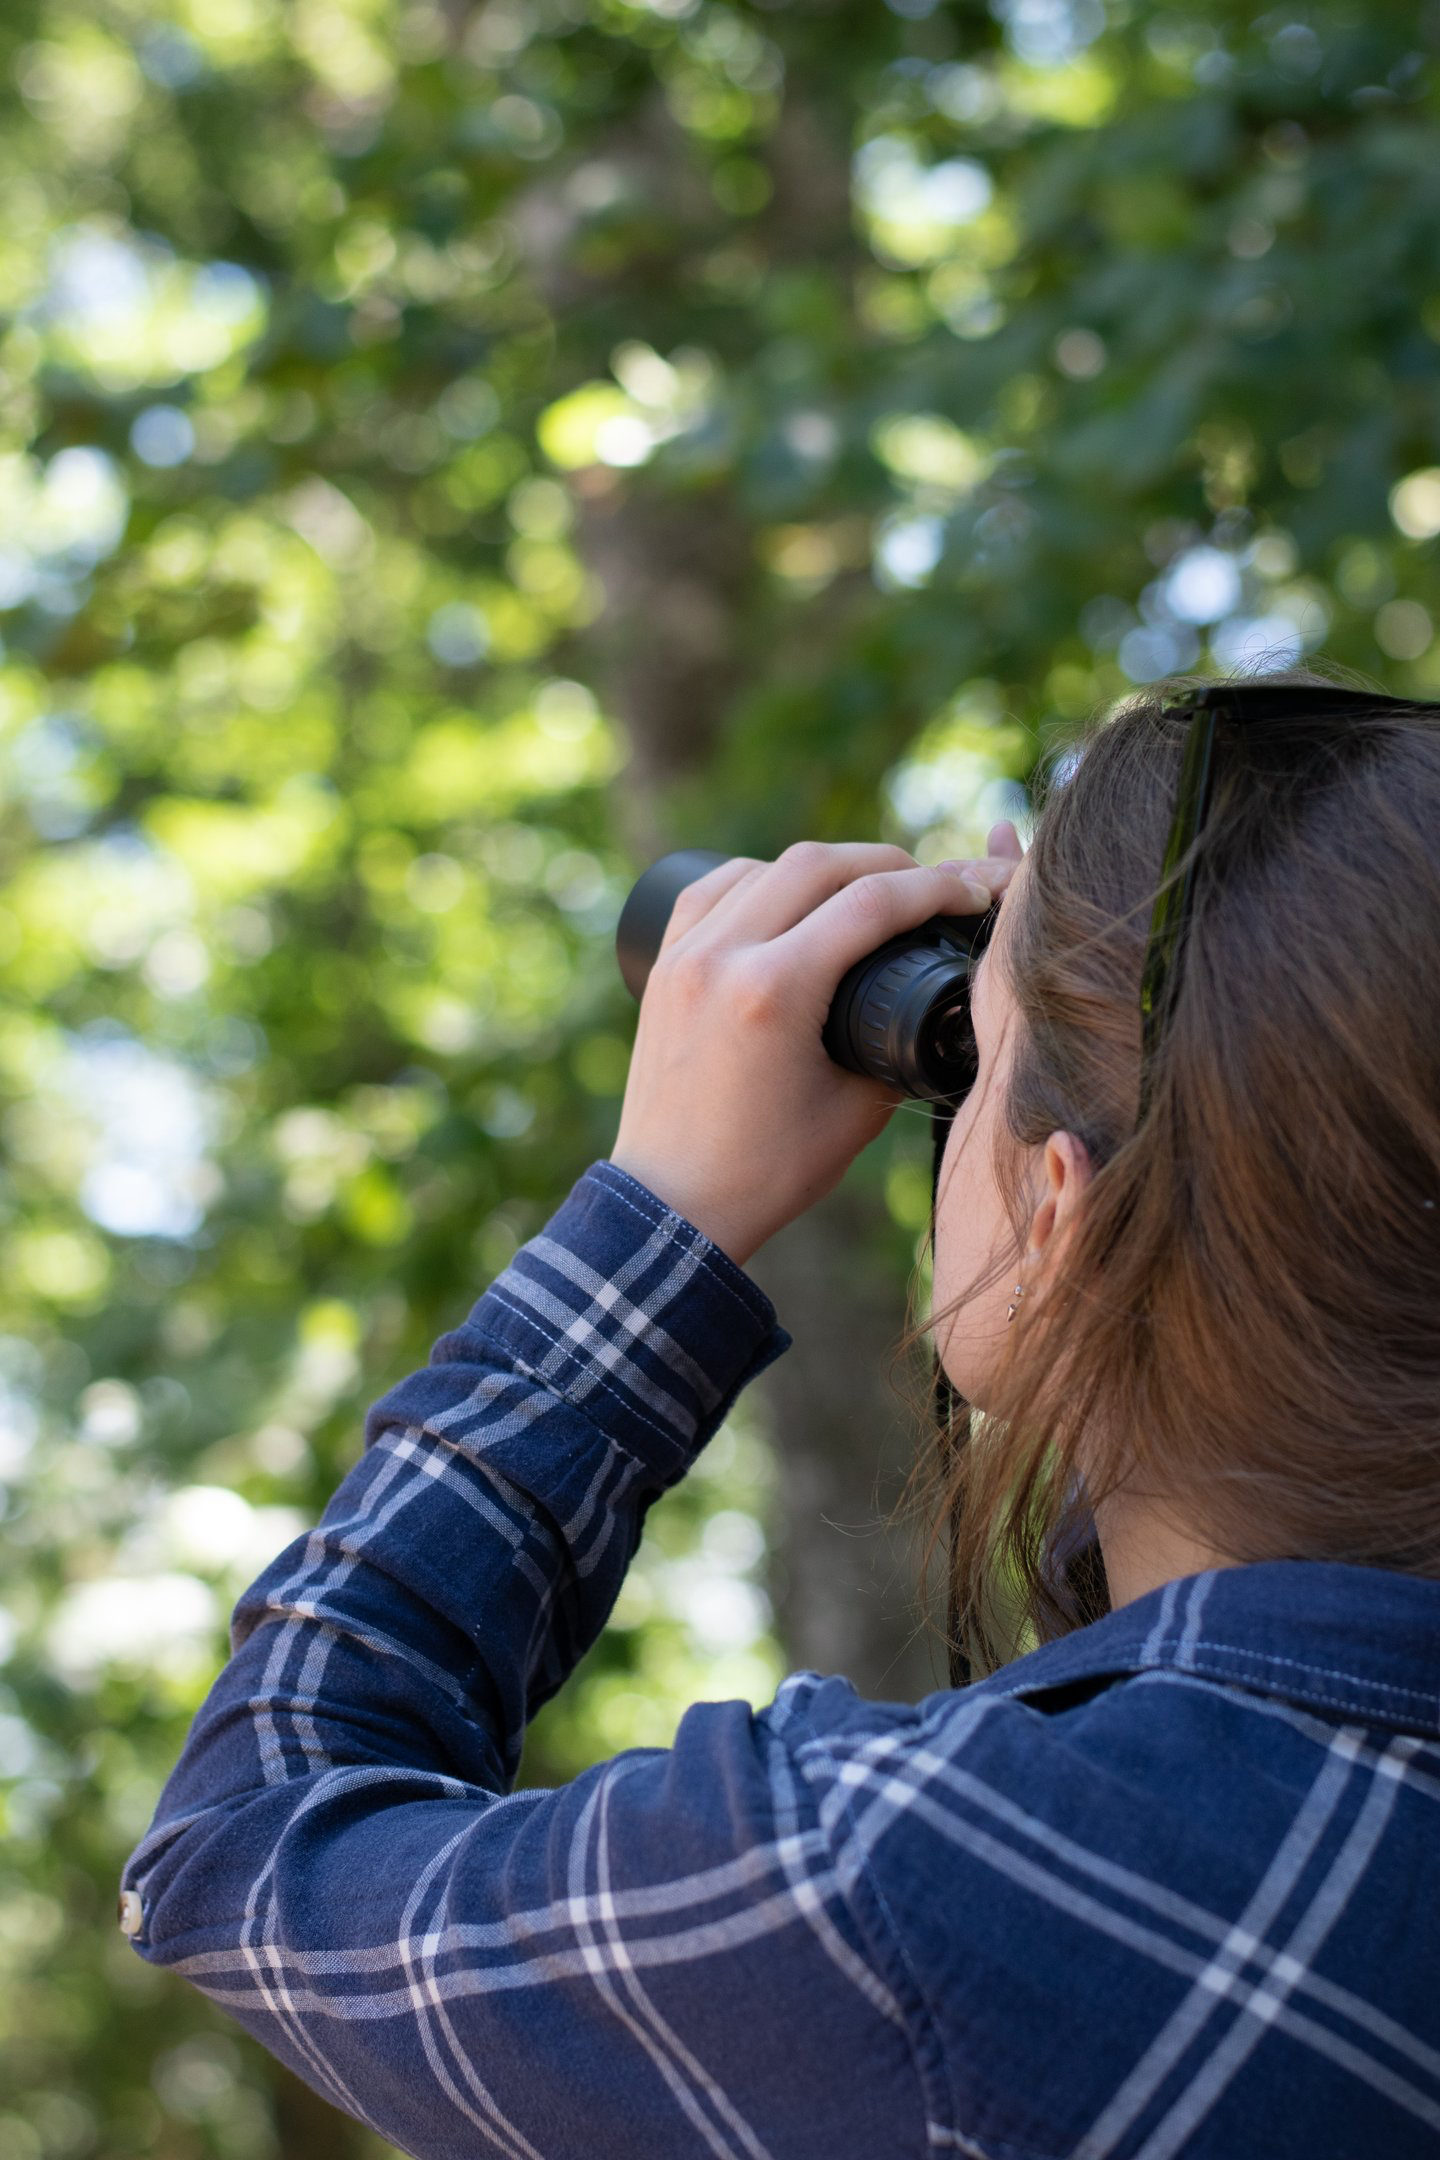 A Girl Is Birdwatching  The Photo Is Of The Back Of Her Head As She Looks Through A Pair Of Binoculars